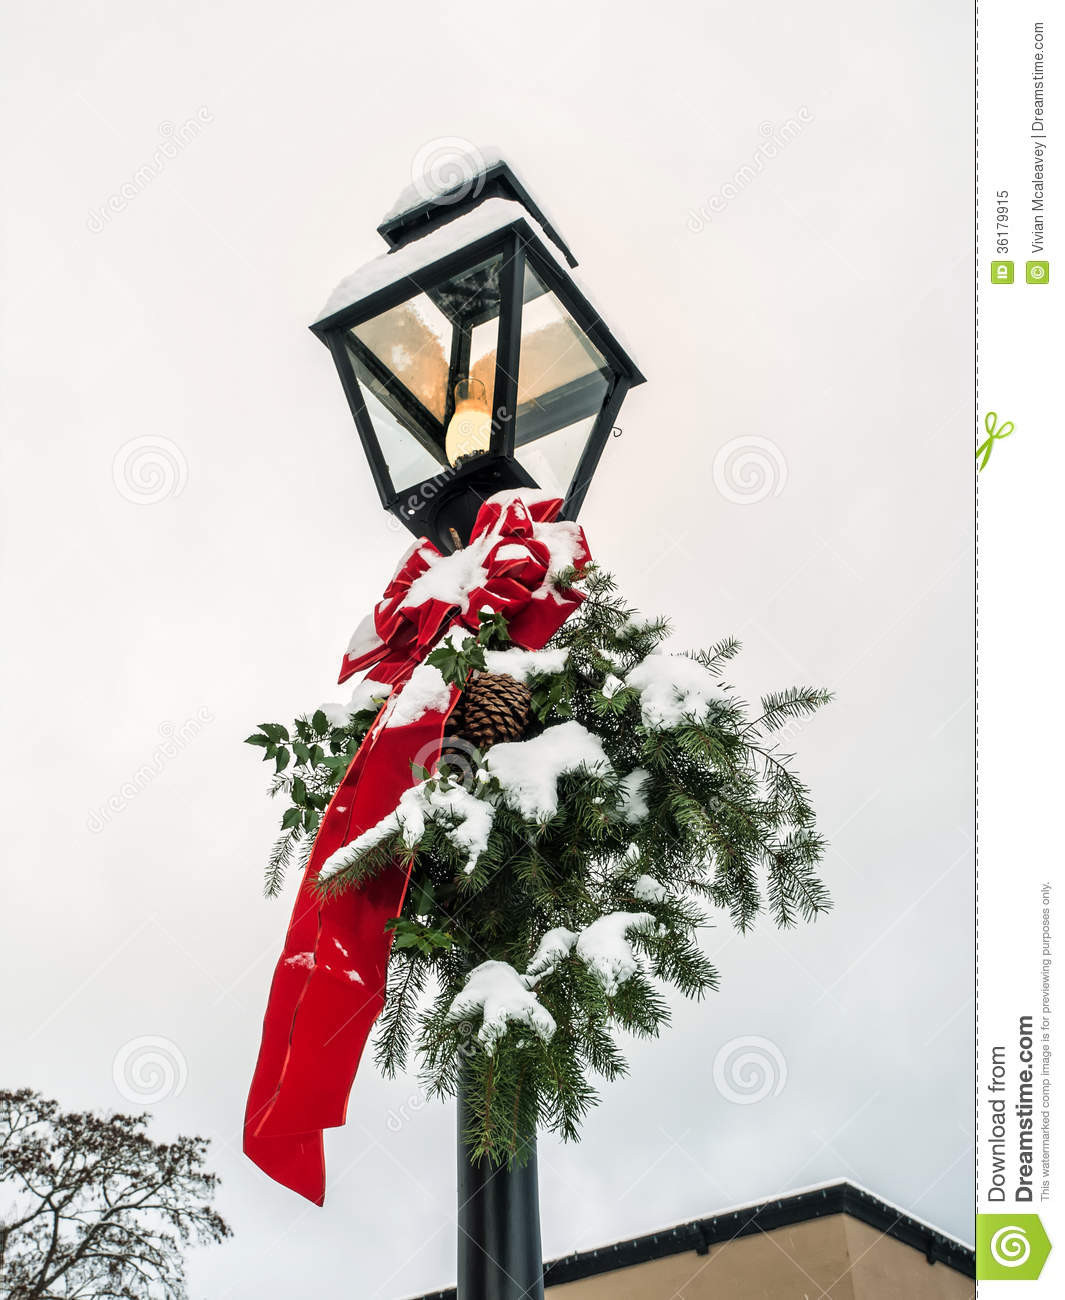 Christmas Lamp Post Decoration
 Lamp Post With Christmas Decoration Royalty Free Stock